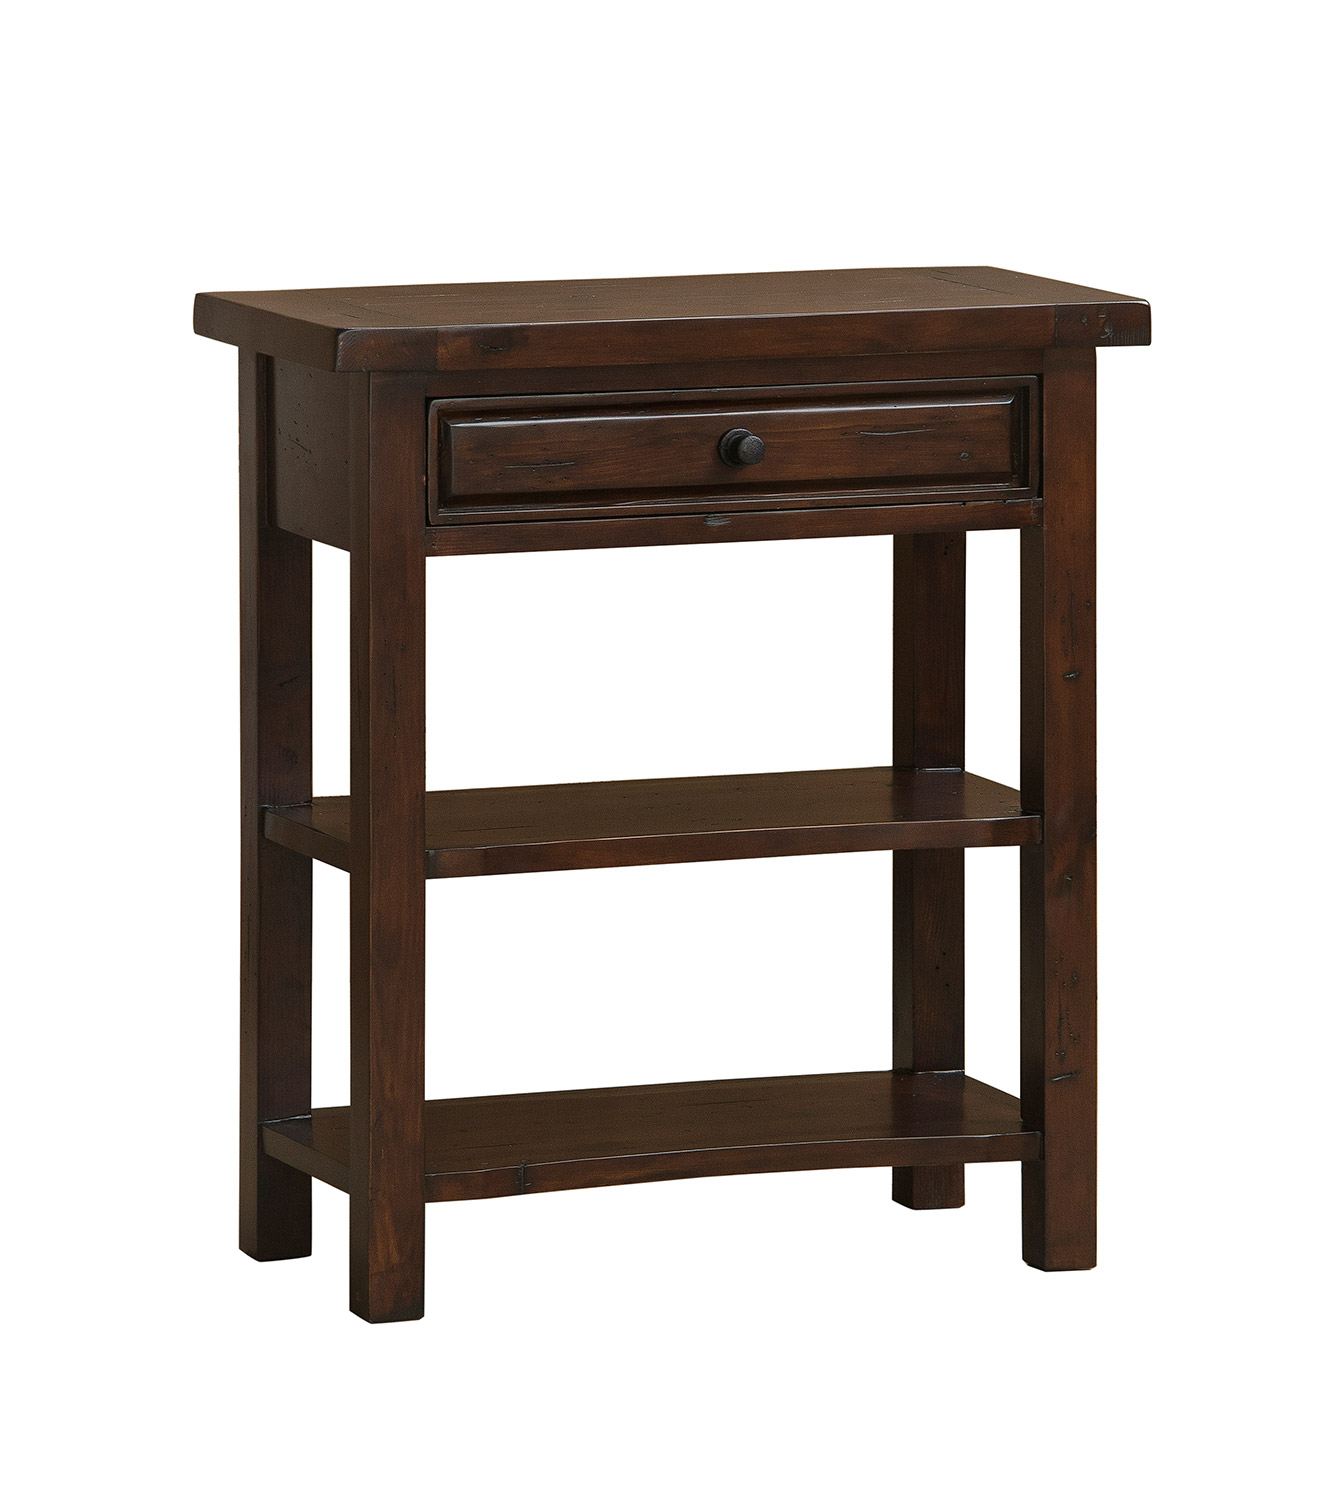 Hillsdale Tuscan Retreat Single Drawer Console Table - Rustic Mahogany